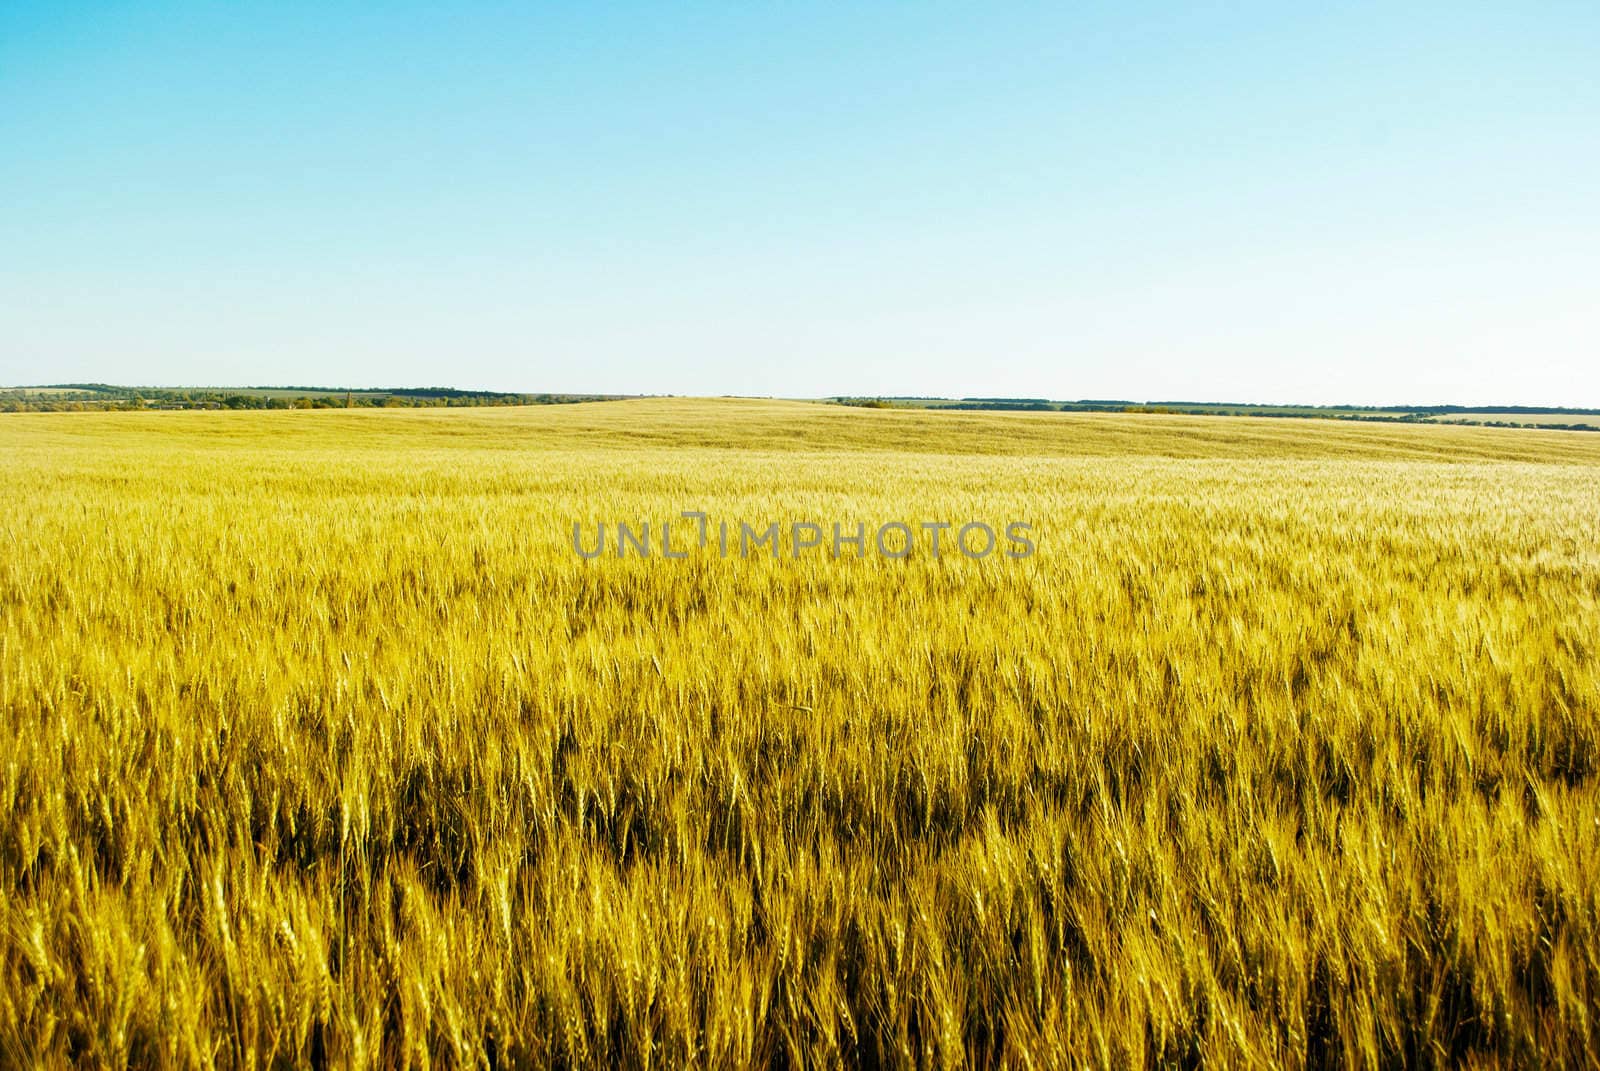 immature wheat  field  on  a background of blue sky